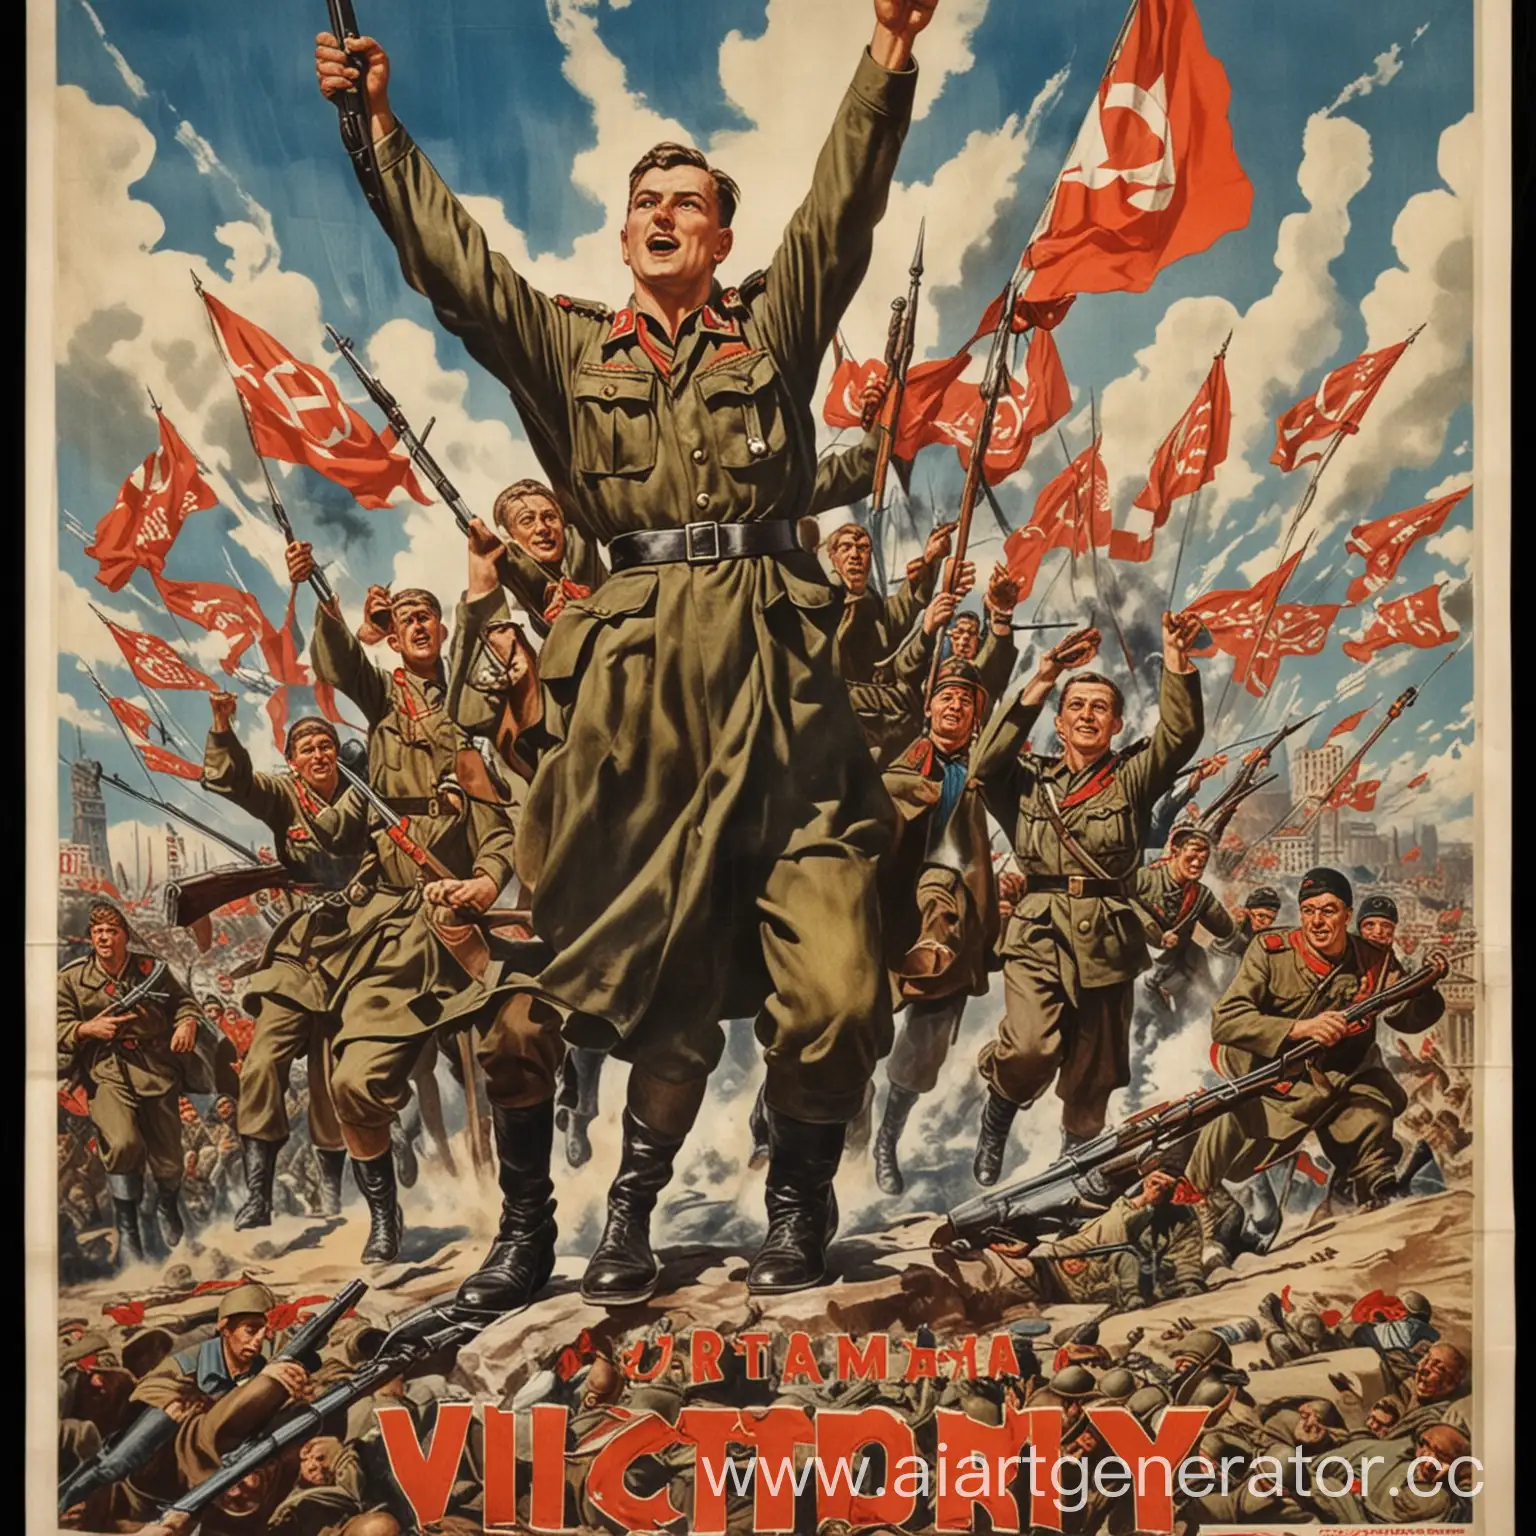 Celebrating-Victory-Day-1945-Patriotic-Parade-and-Commemoration